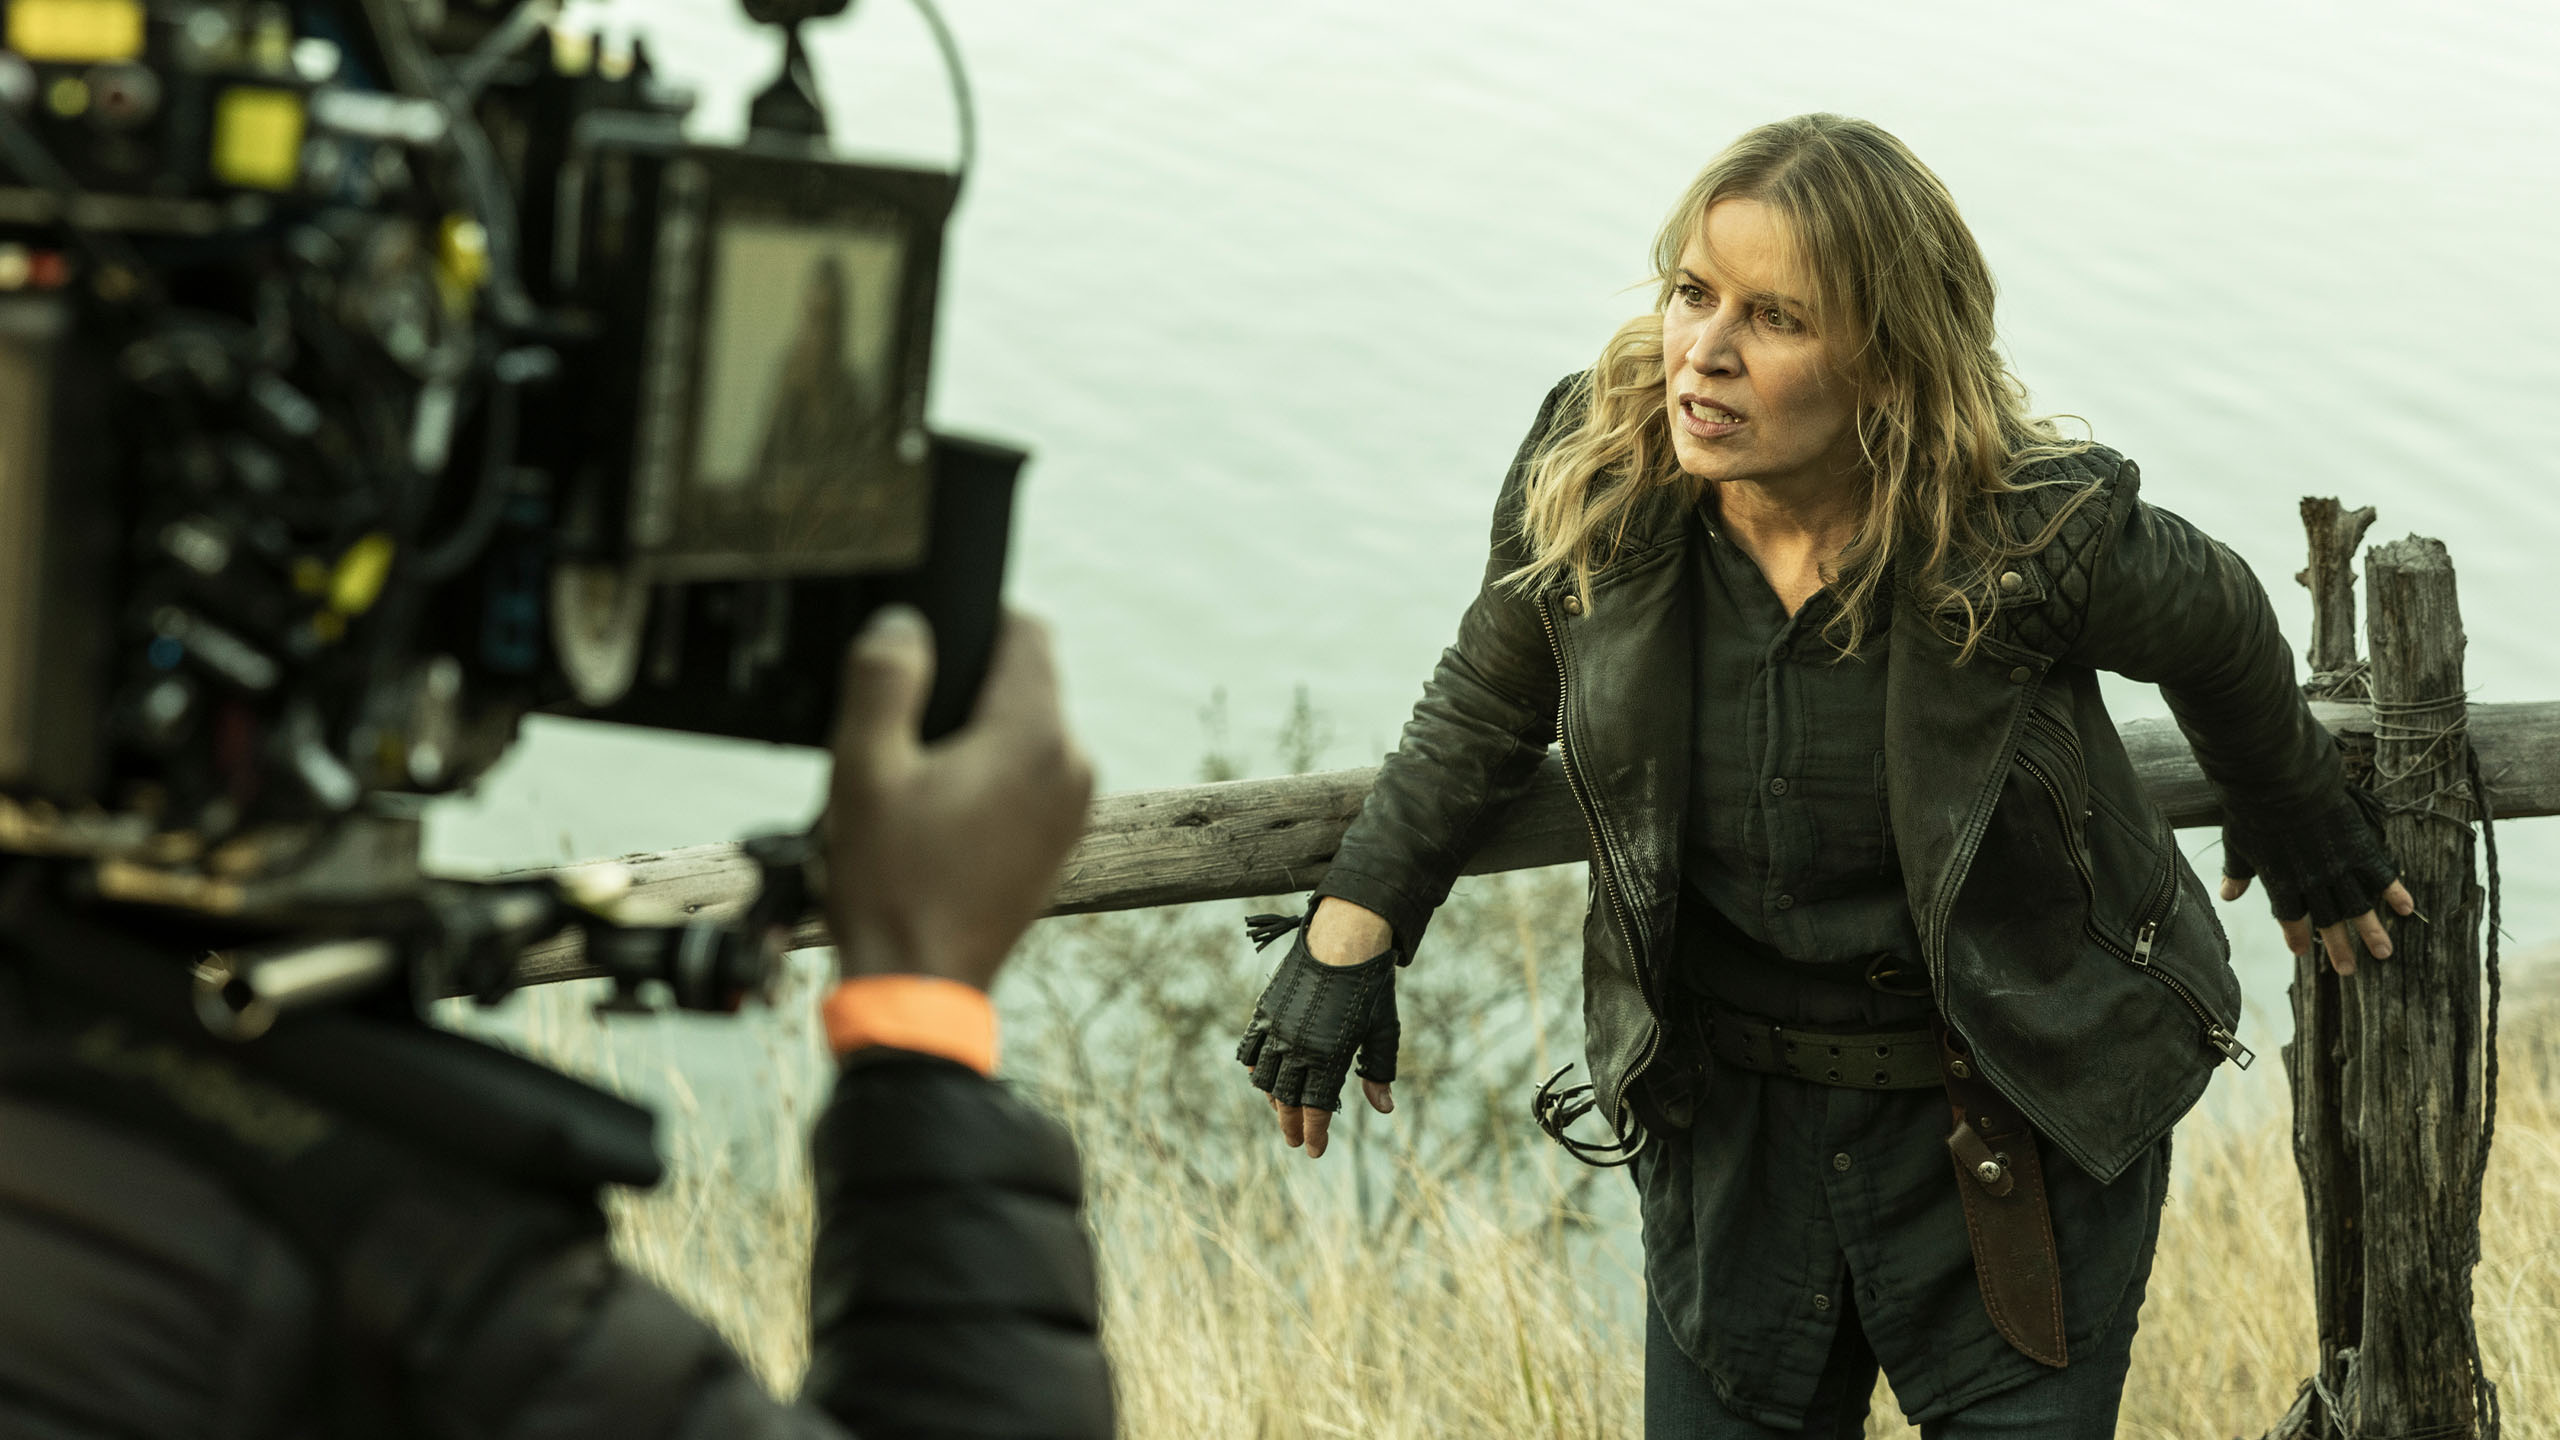 Inside Fear the Walking Dead Season 7 (Part 2), The cast and show creators take fans behind the scenes of the making of "Fear the Walking Dead," Season 7 Part 2.